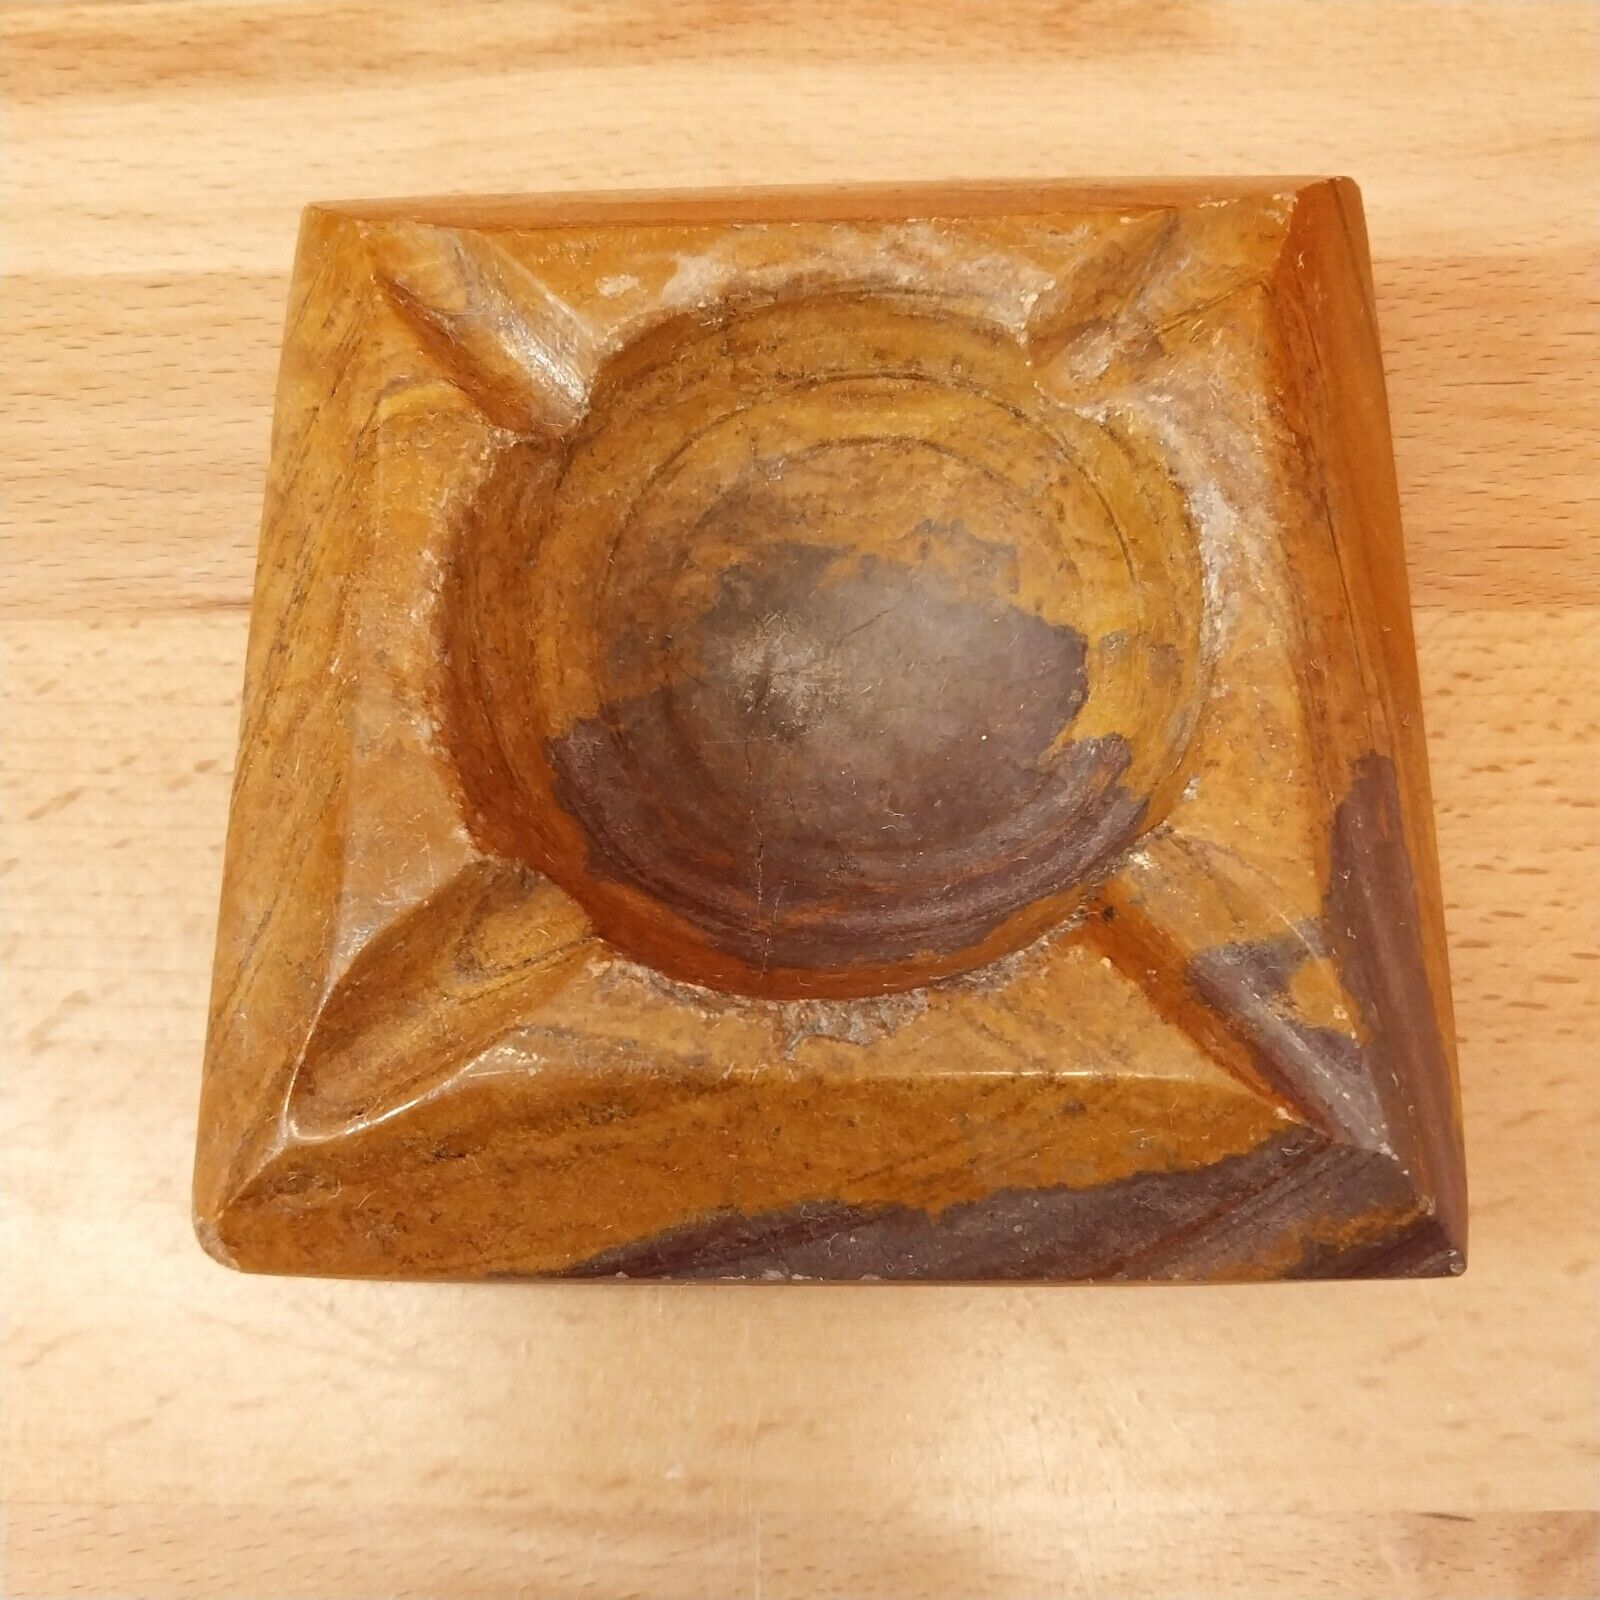 Vintage Onyx Hand Carved Stone Ashtray 4 Slot Square Brown Stone 4x4 Paperweight